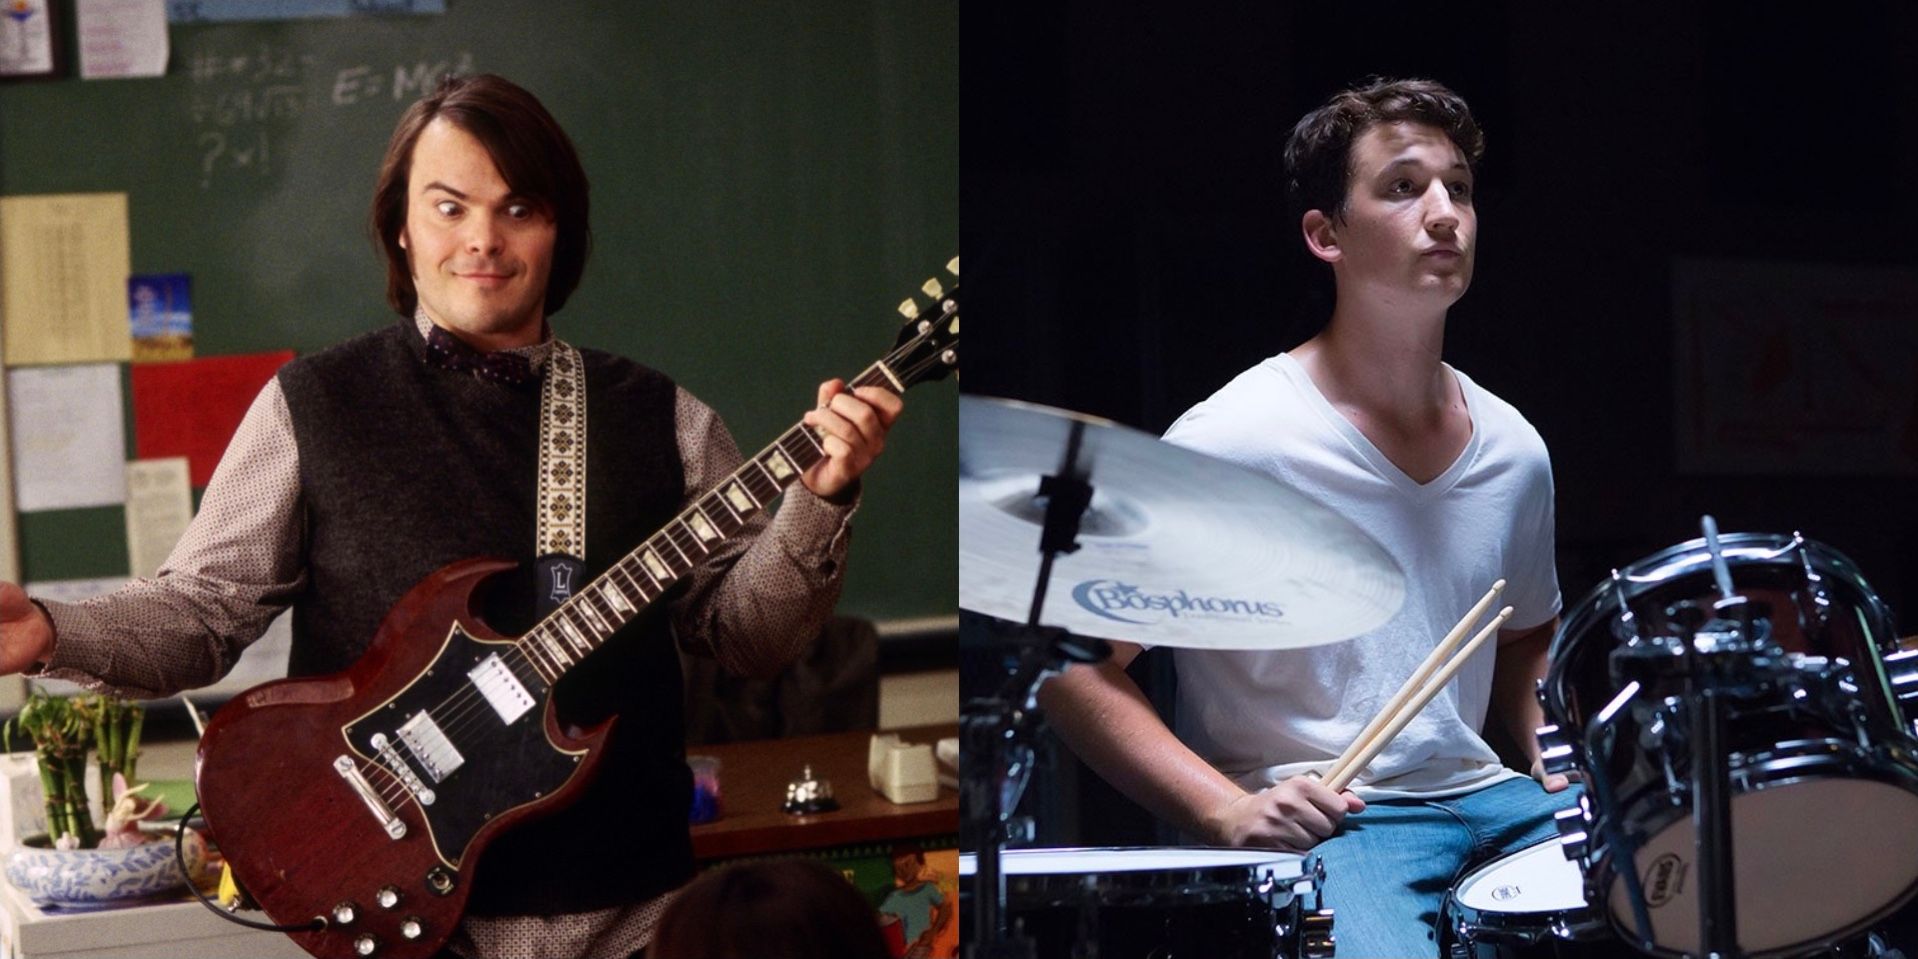 MOVIES ABOUT MUSIC FEATURE IMAGE - SCHOOL OF ROCK (2003), WHIPLASH (2014)